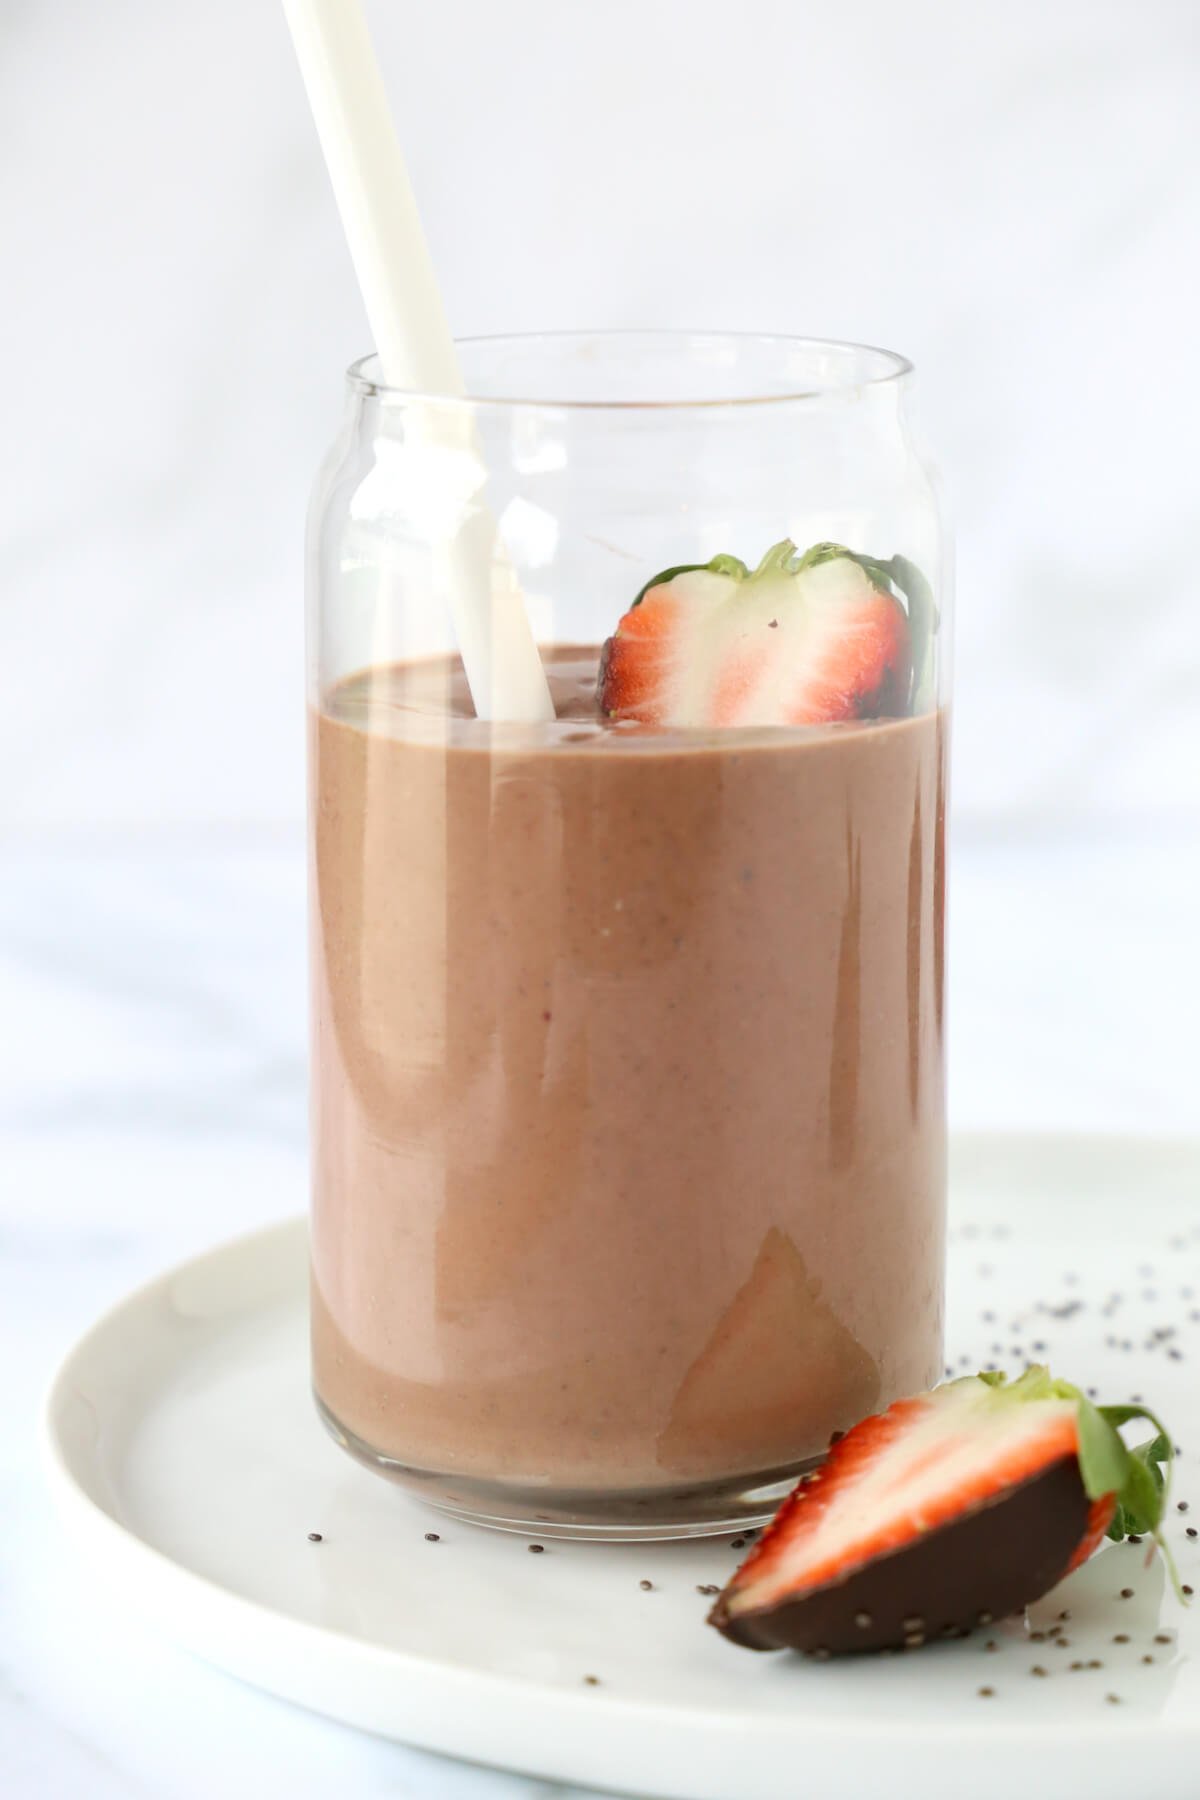 A clear glass sitting on a white plate filled with chocolate brown smoothie, a white straw and a sliced strawberry.